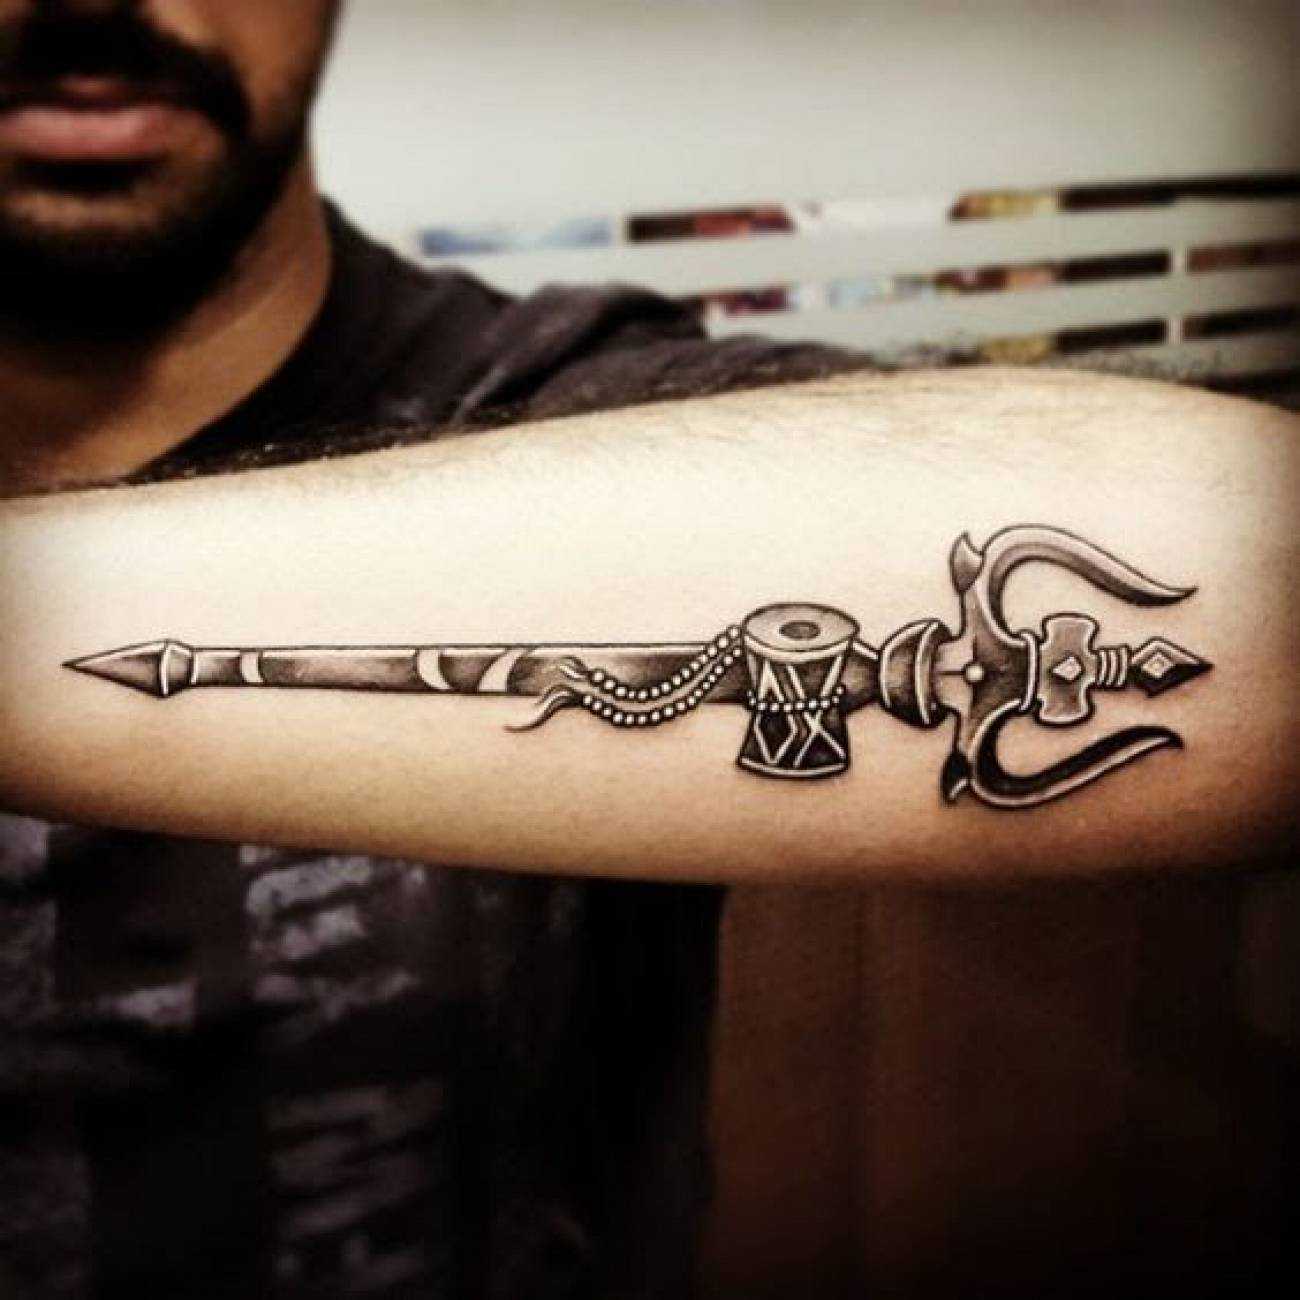 What are some really good tattoo artists in delhi/ncr at a digestible cost?  - Quora